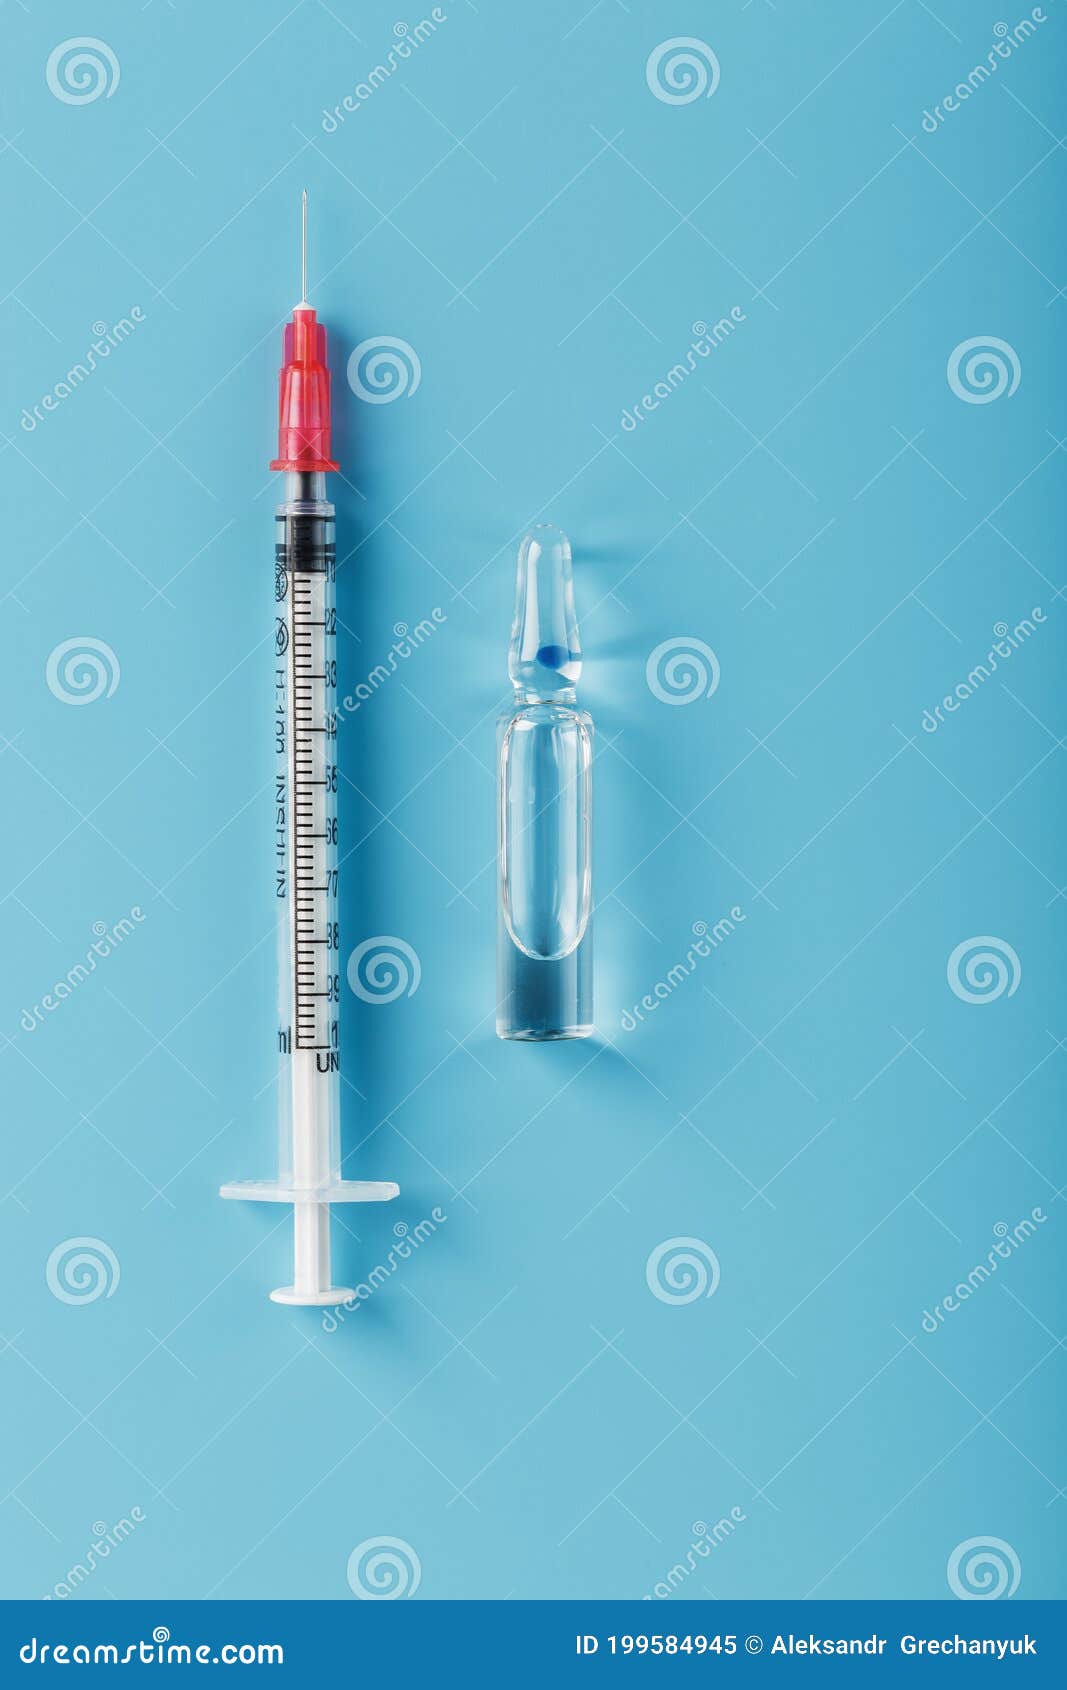 ampoule with medicine and syringe on a blue background, top view